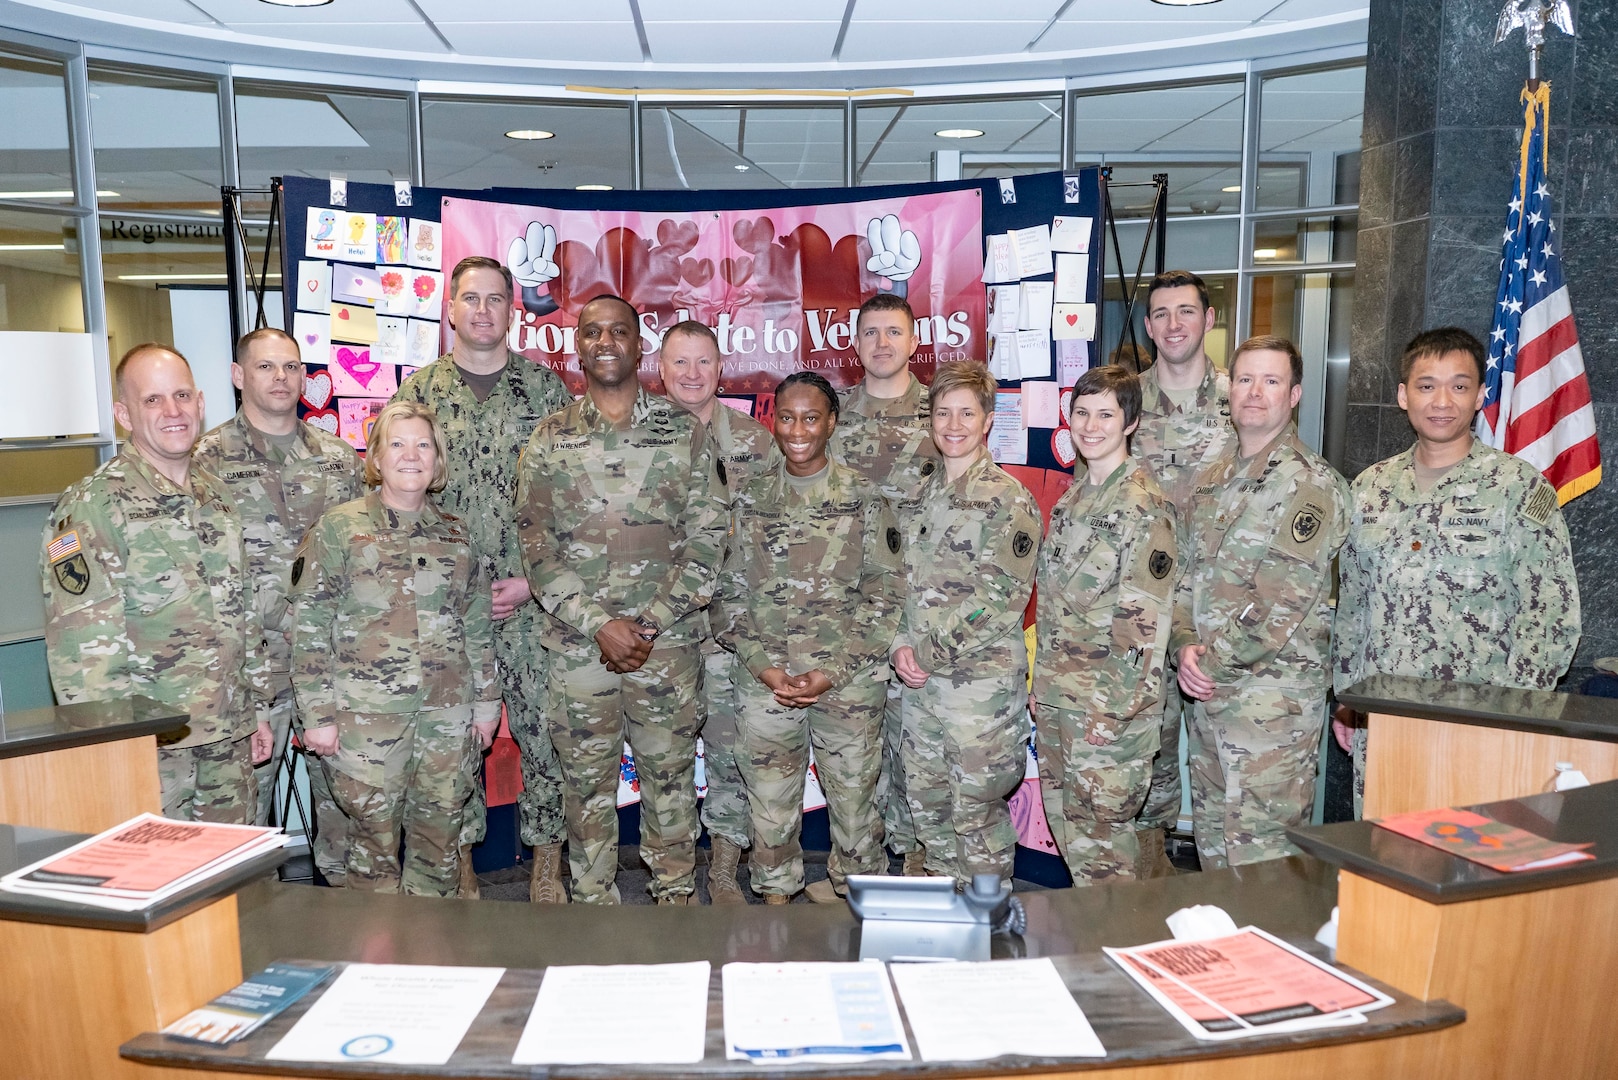 DLA Troop Support military personnel pose for a photo at the Corporal Michael J. Crescenz Veterans Affairs Medical Center, Feb. 10, 2020 in Philadelphia.